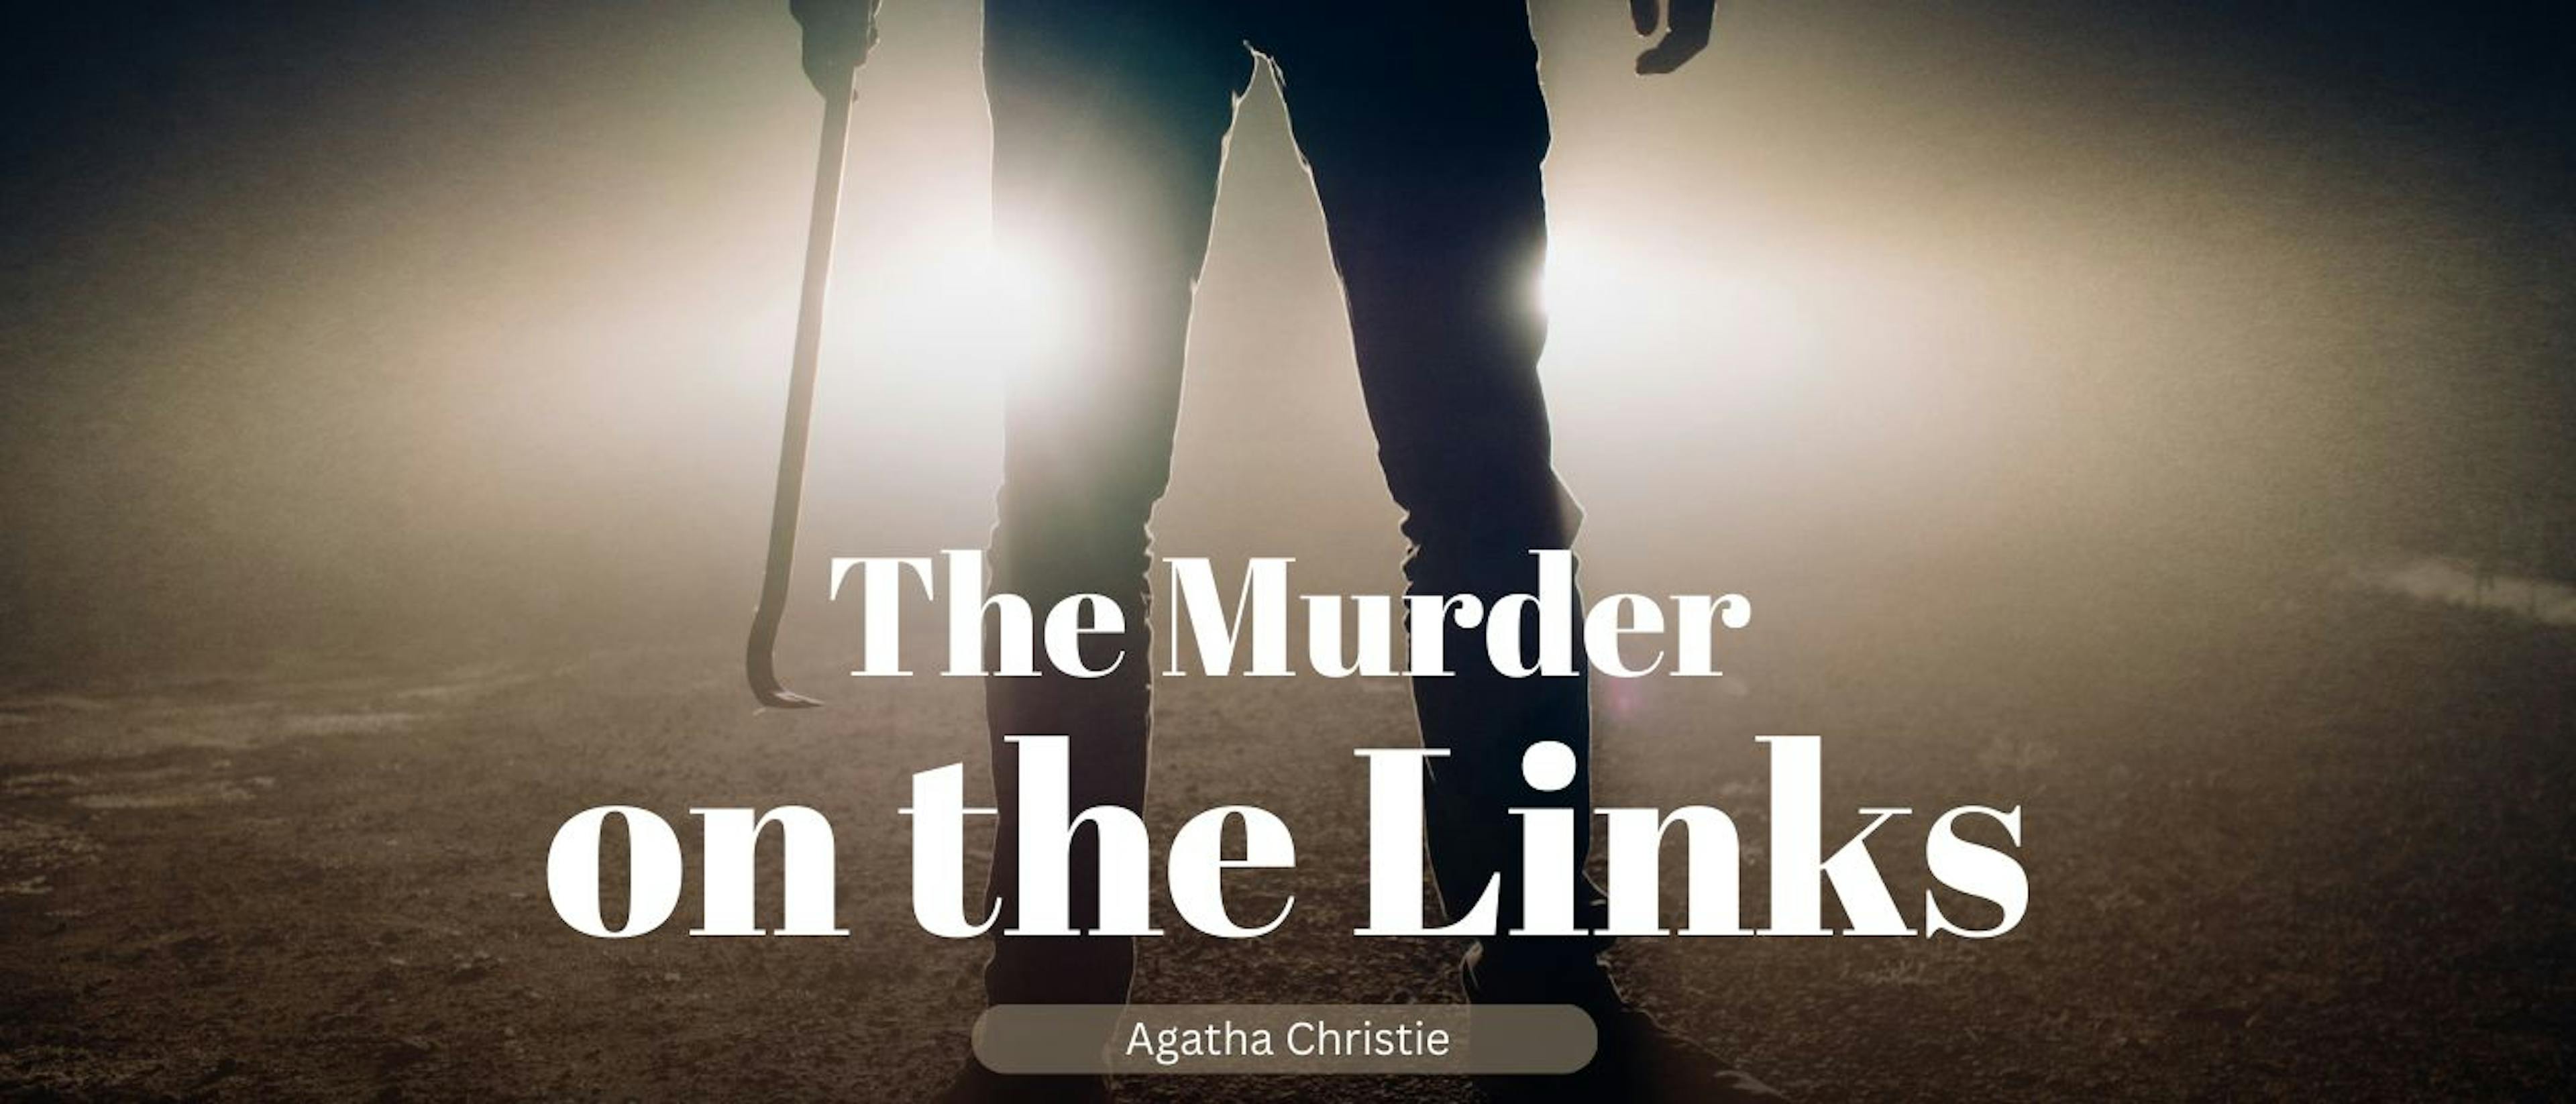 featured image - The Murder on the Links by Agatha Christie - Table of Links